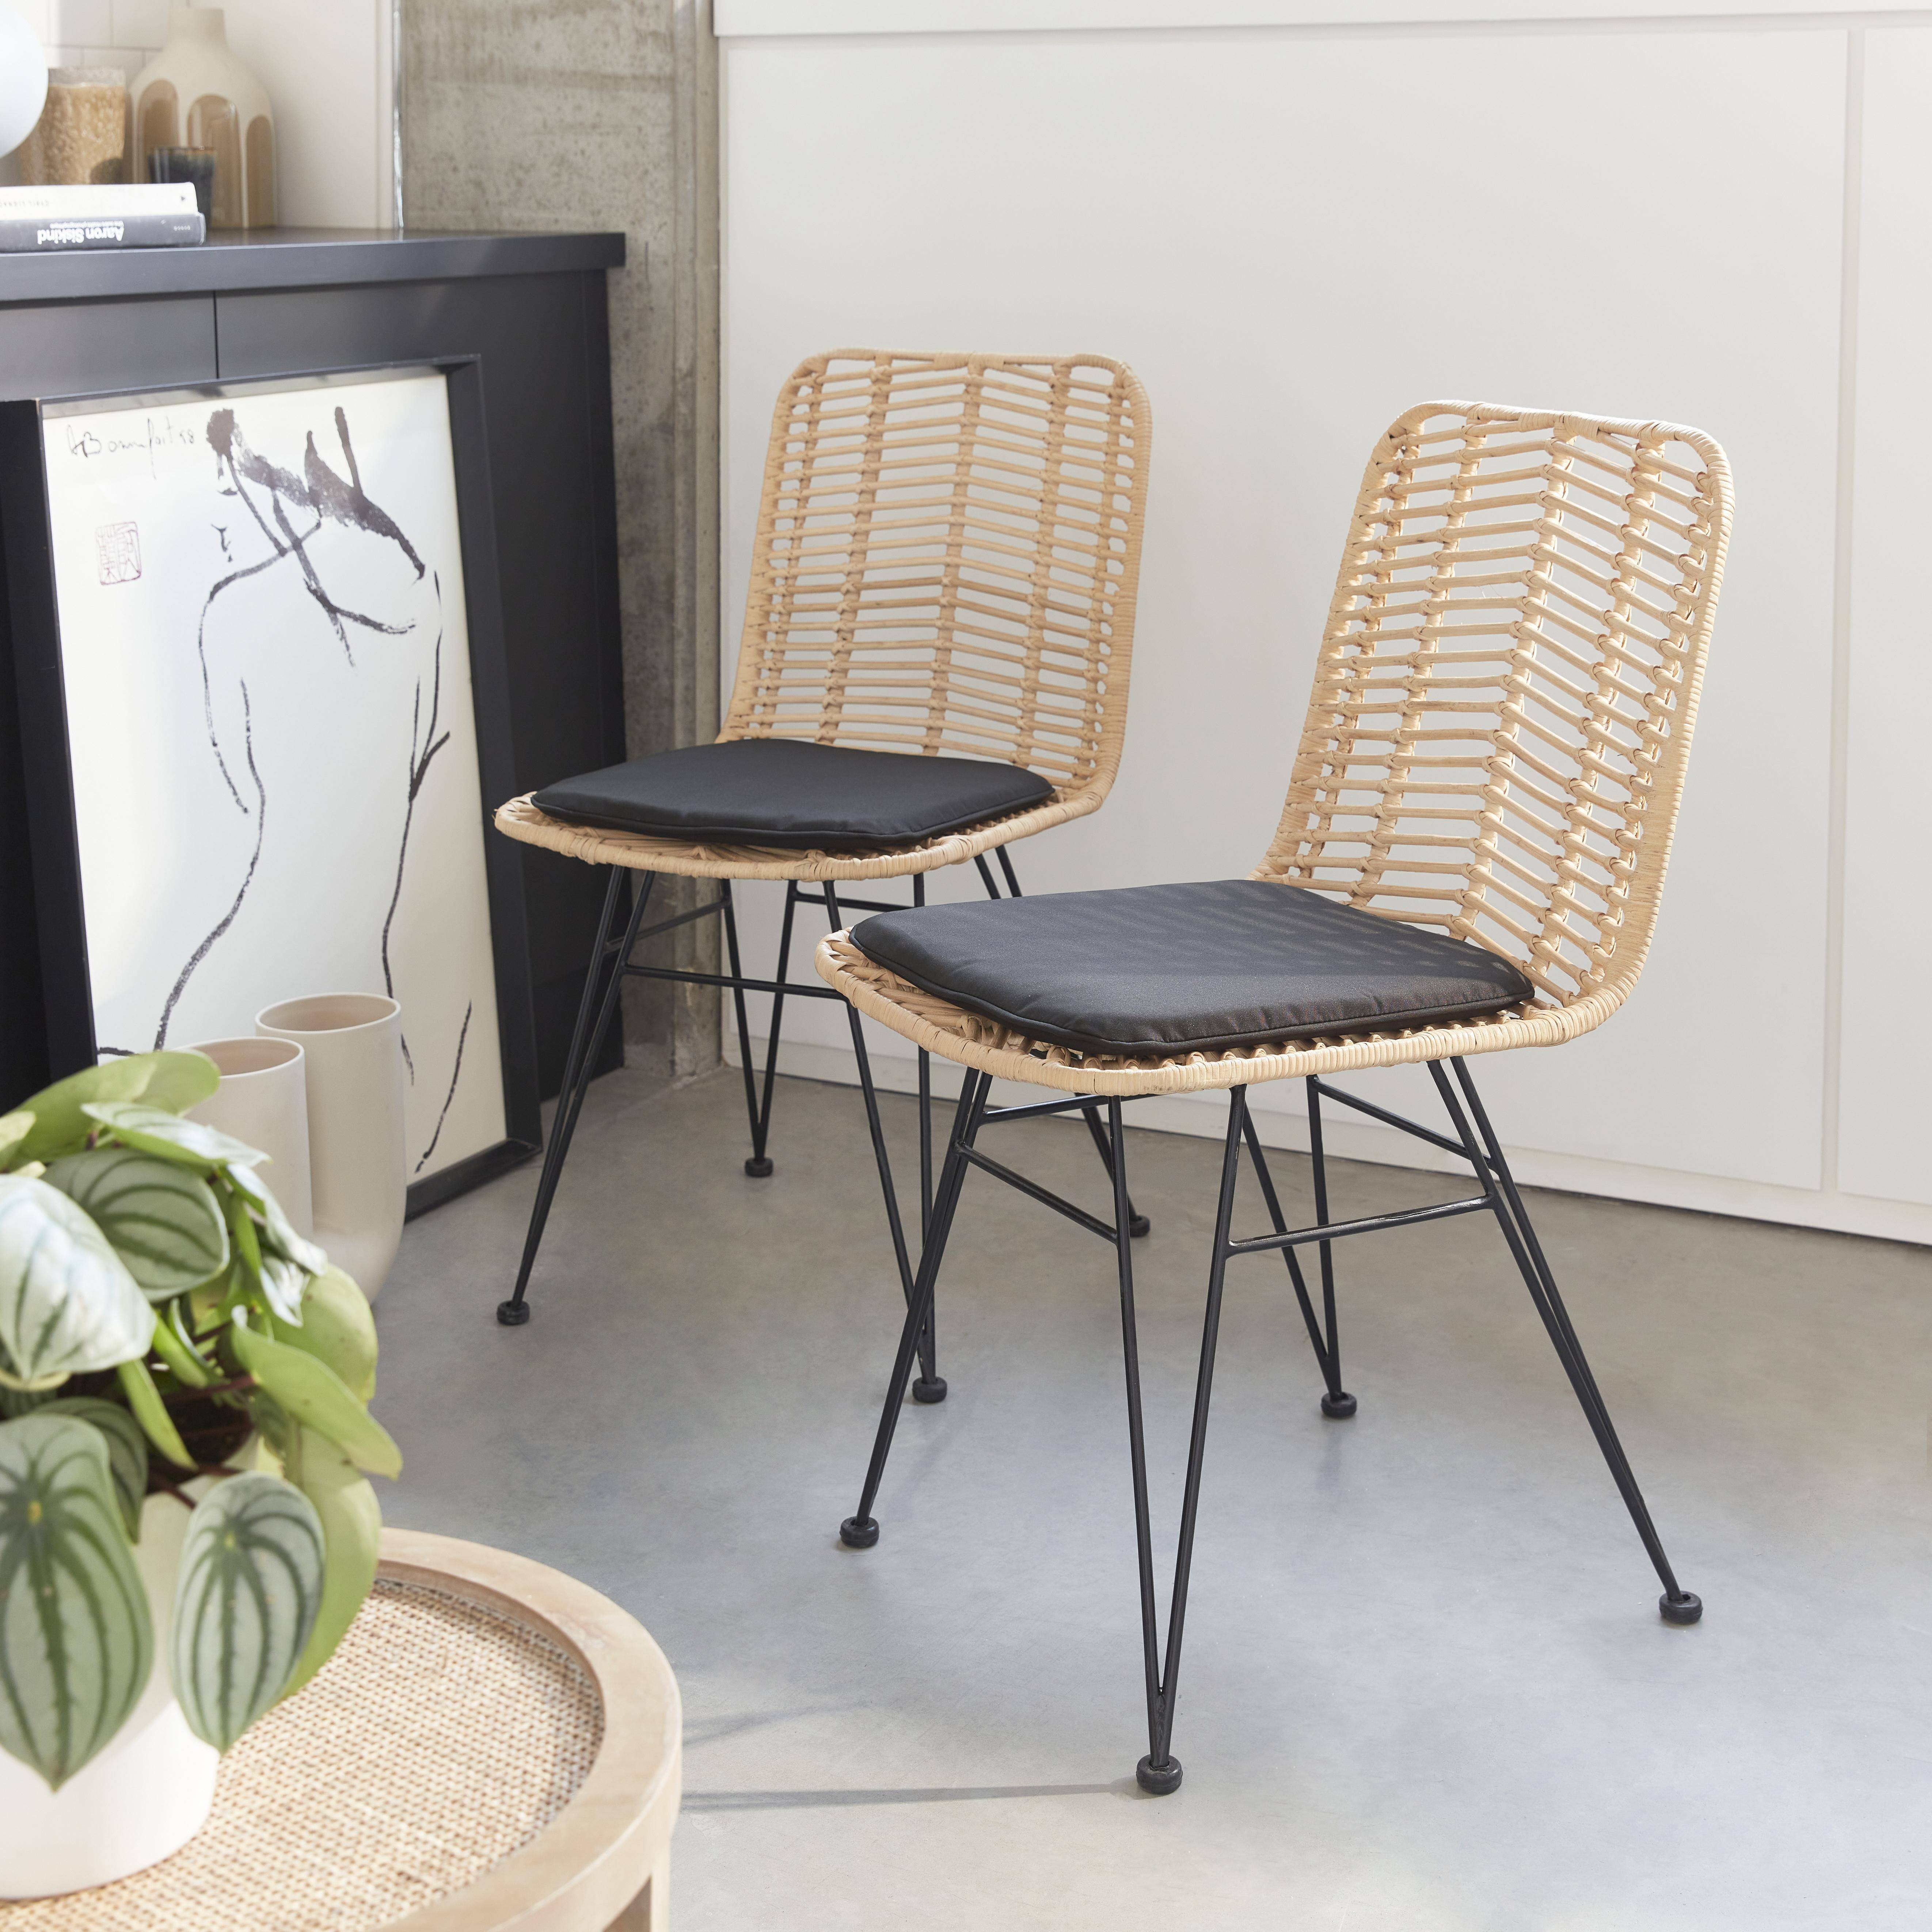 Pair of high-backed rattan dining chairs with metal legs and cushions - Cahya - Natural rattan, Black cushions Photo1